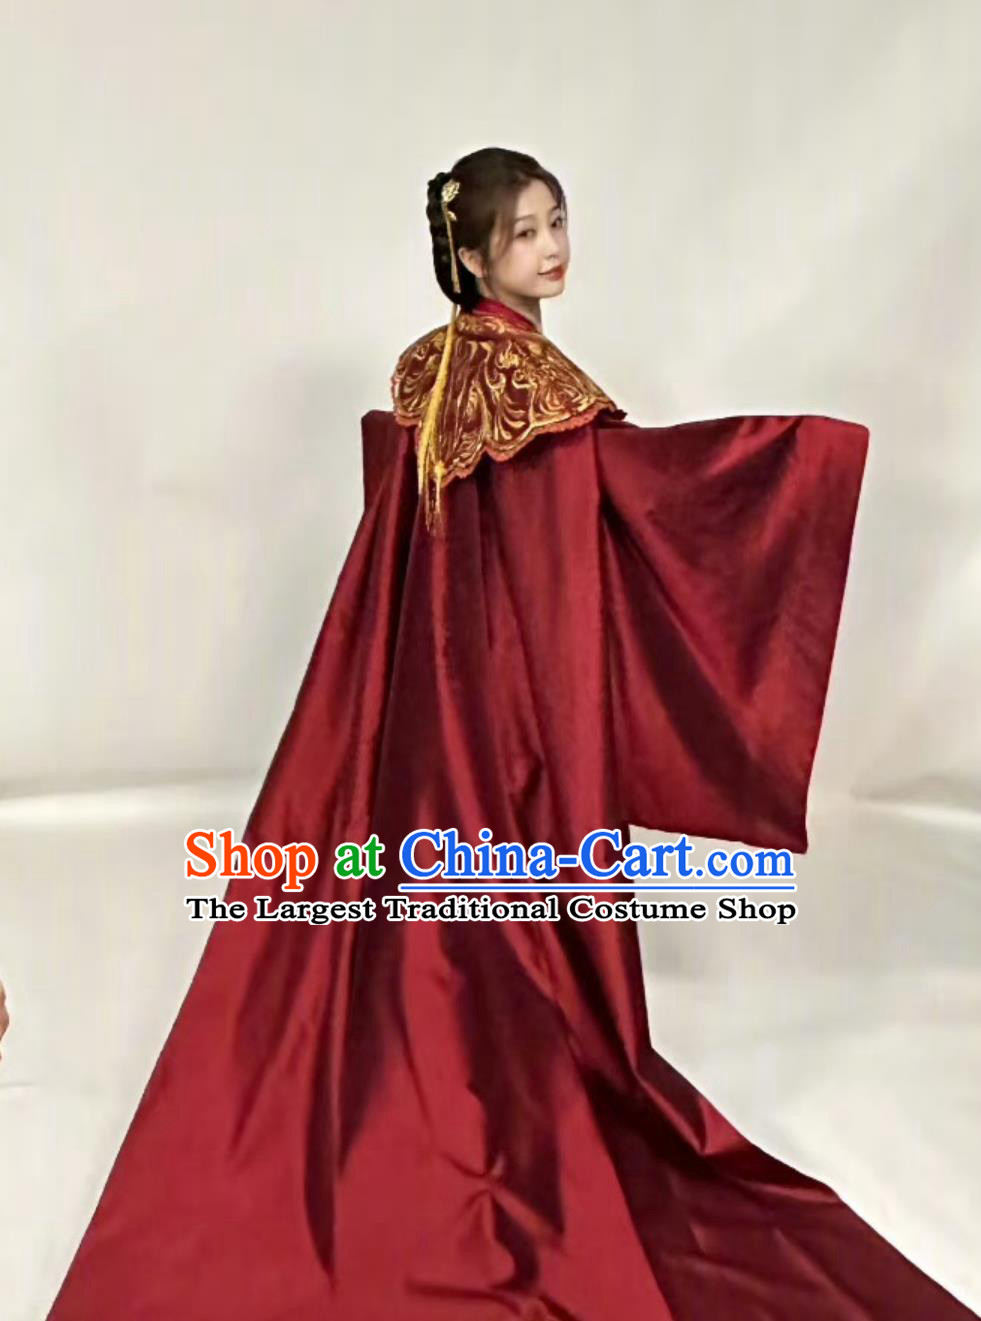 China Ancient Noble Woman Garment Costumes TV Drama My Journey To You Bride Yun Wei Shan Wedding Dresses